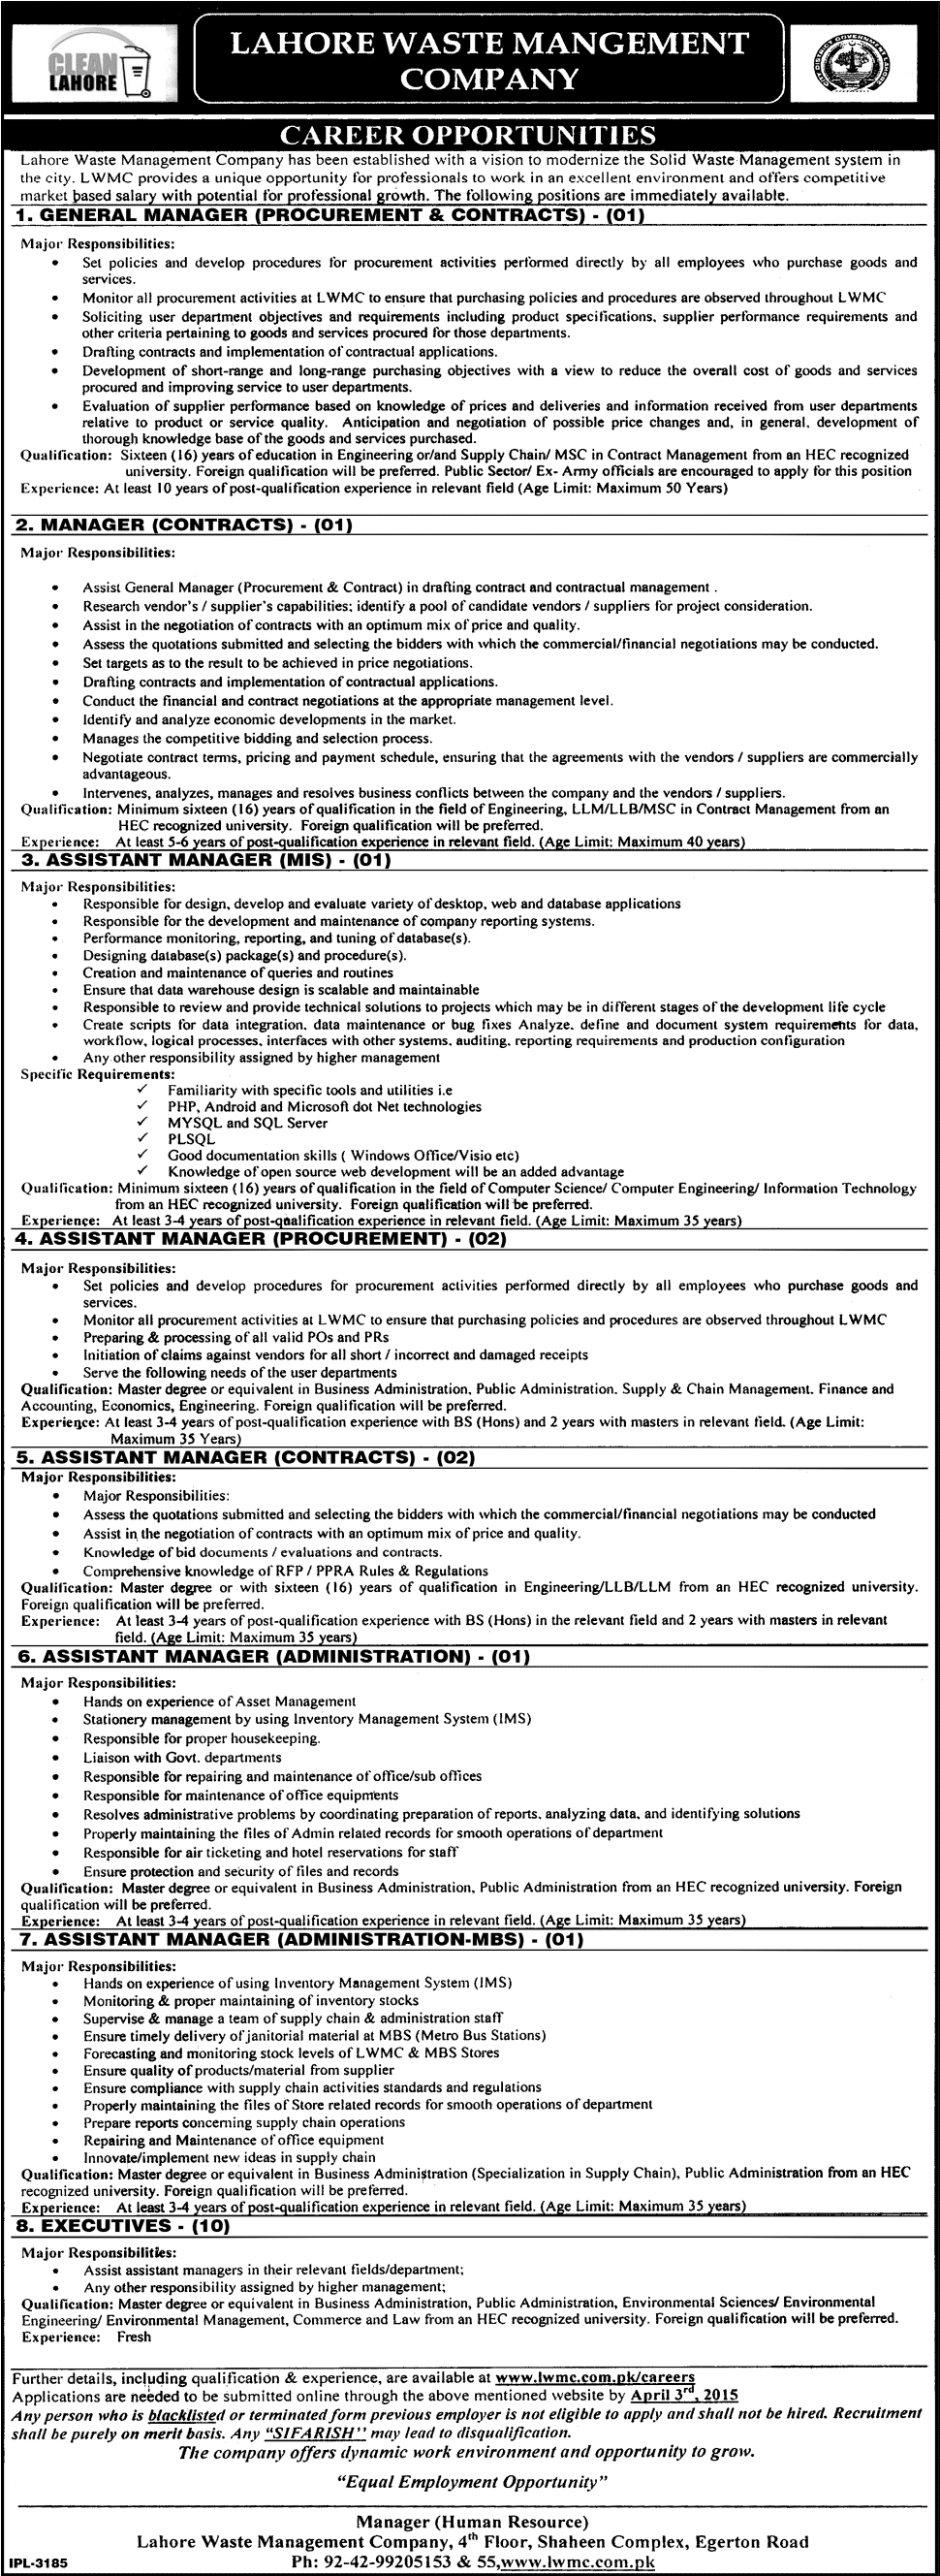 Lahore Waste Management Company LWMC Jobs 2015 Apply Online Last Date